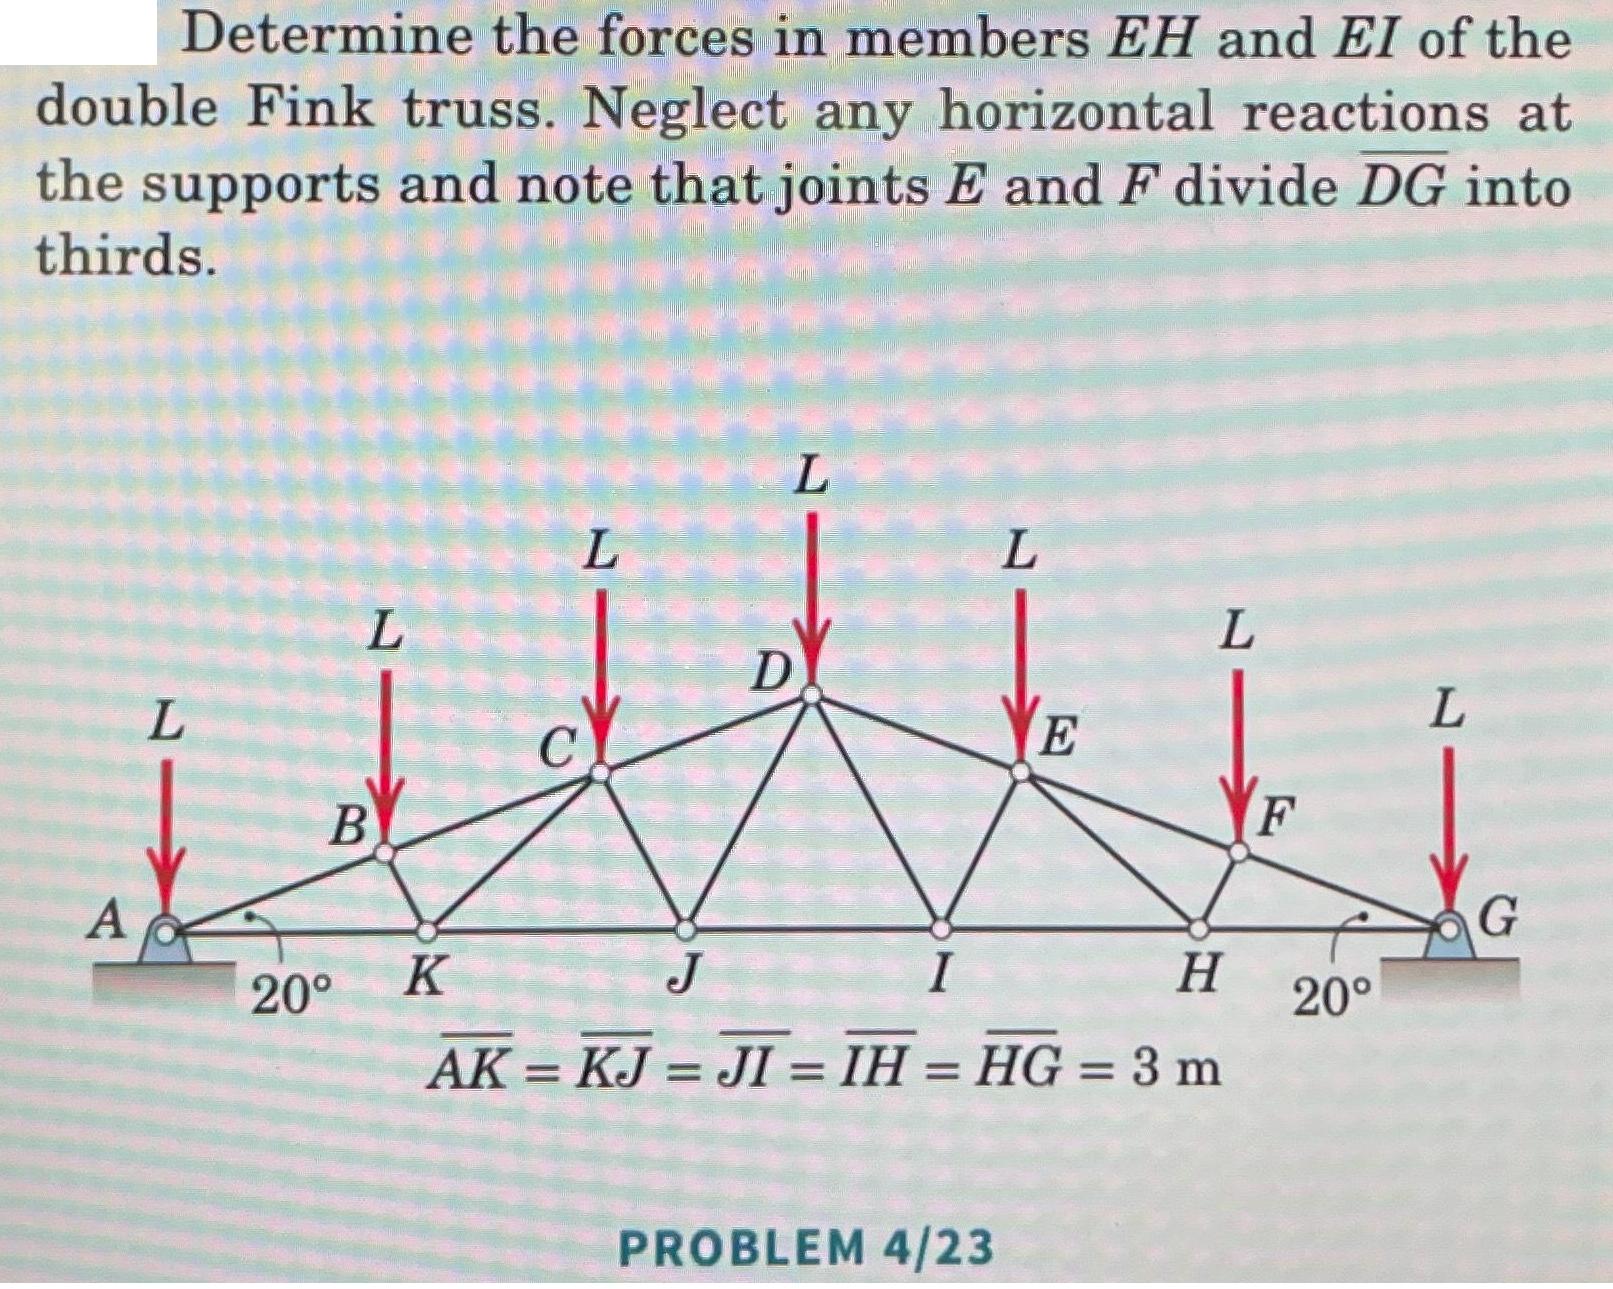 Determine the forces in members EH and EI of the double Fink truss. Neglect any horizontal reactions at the